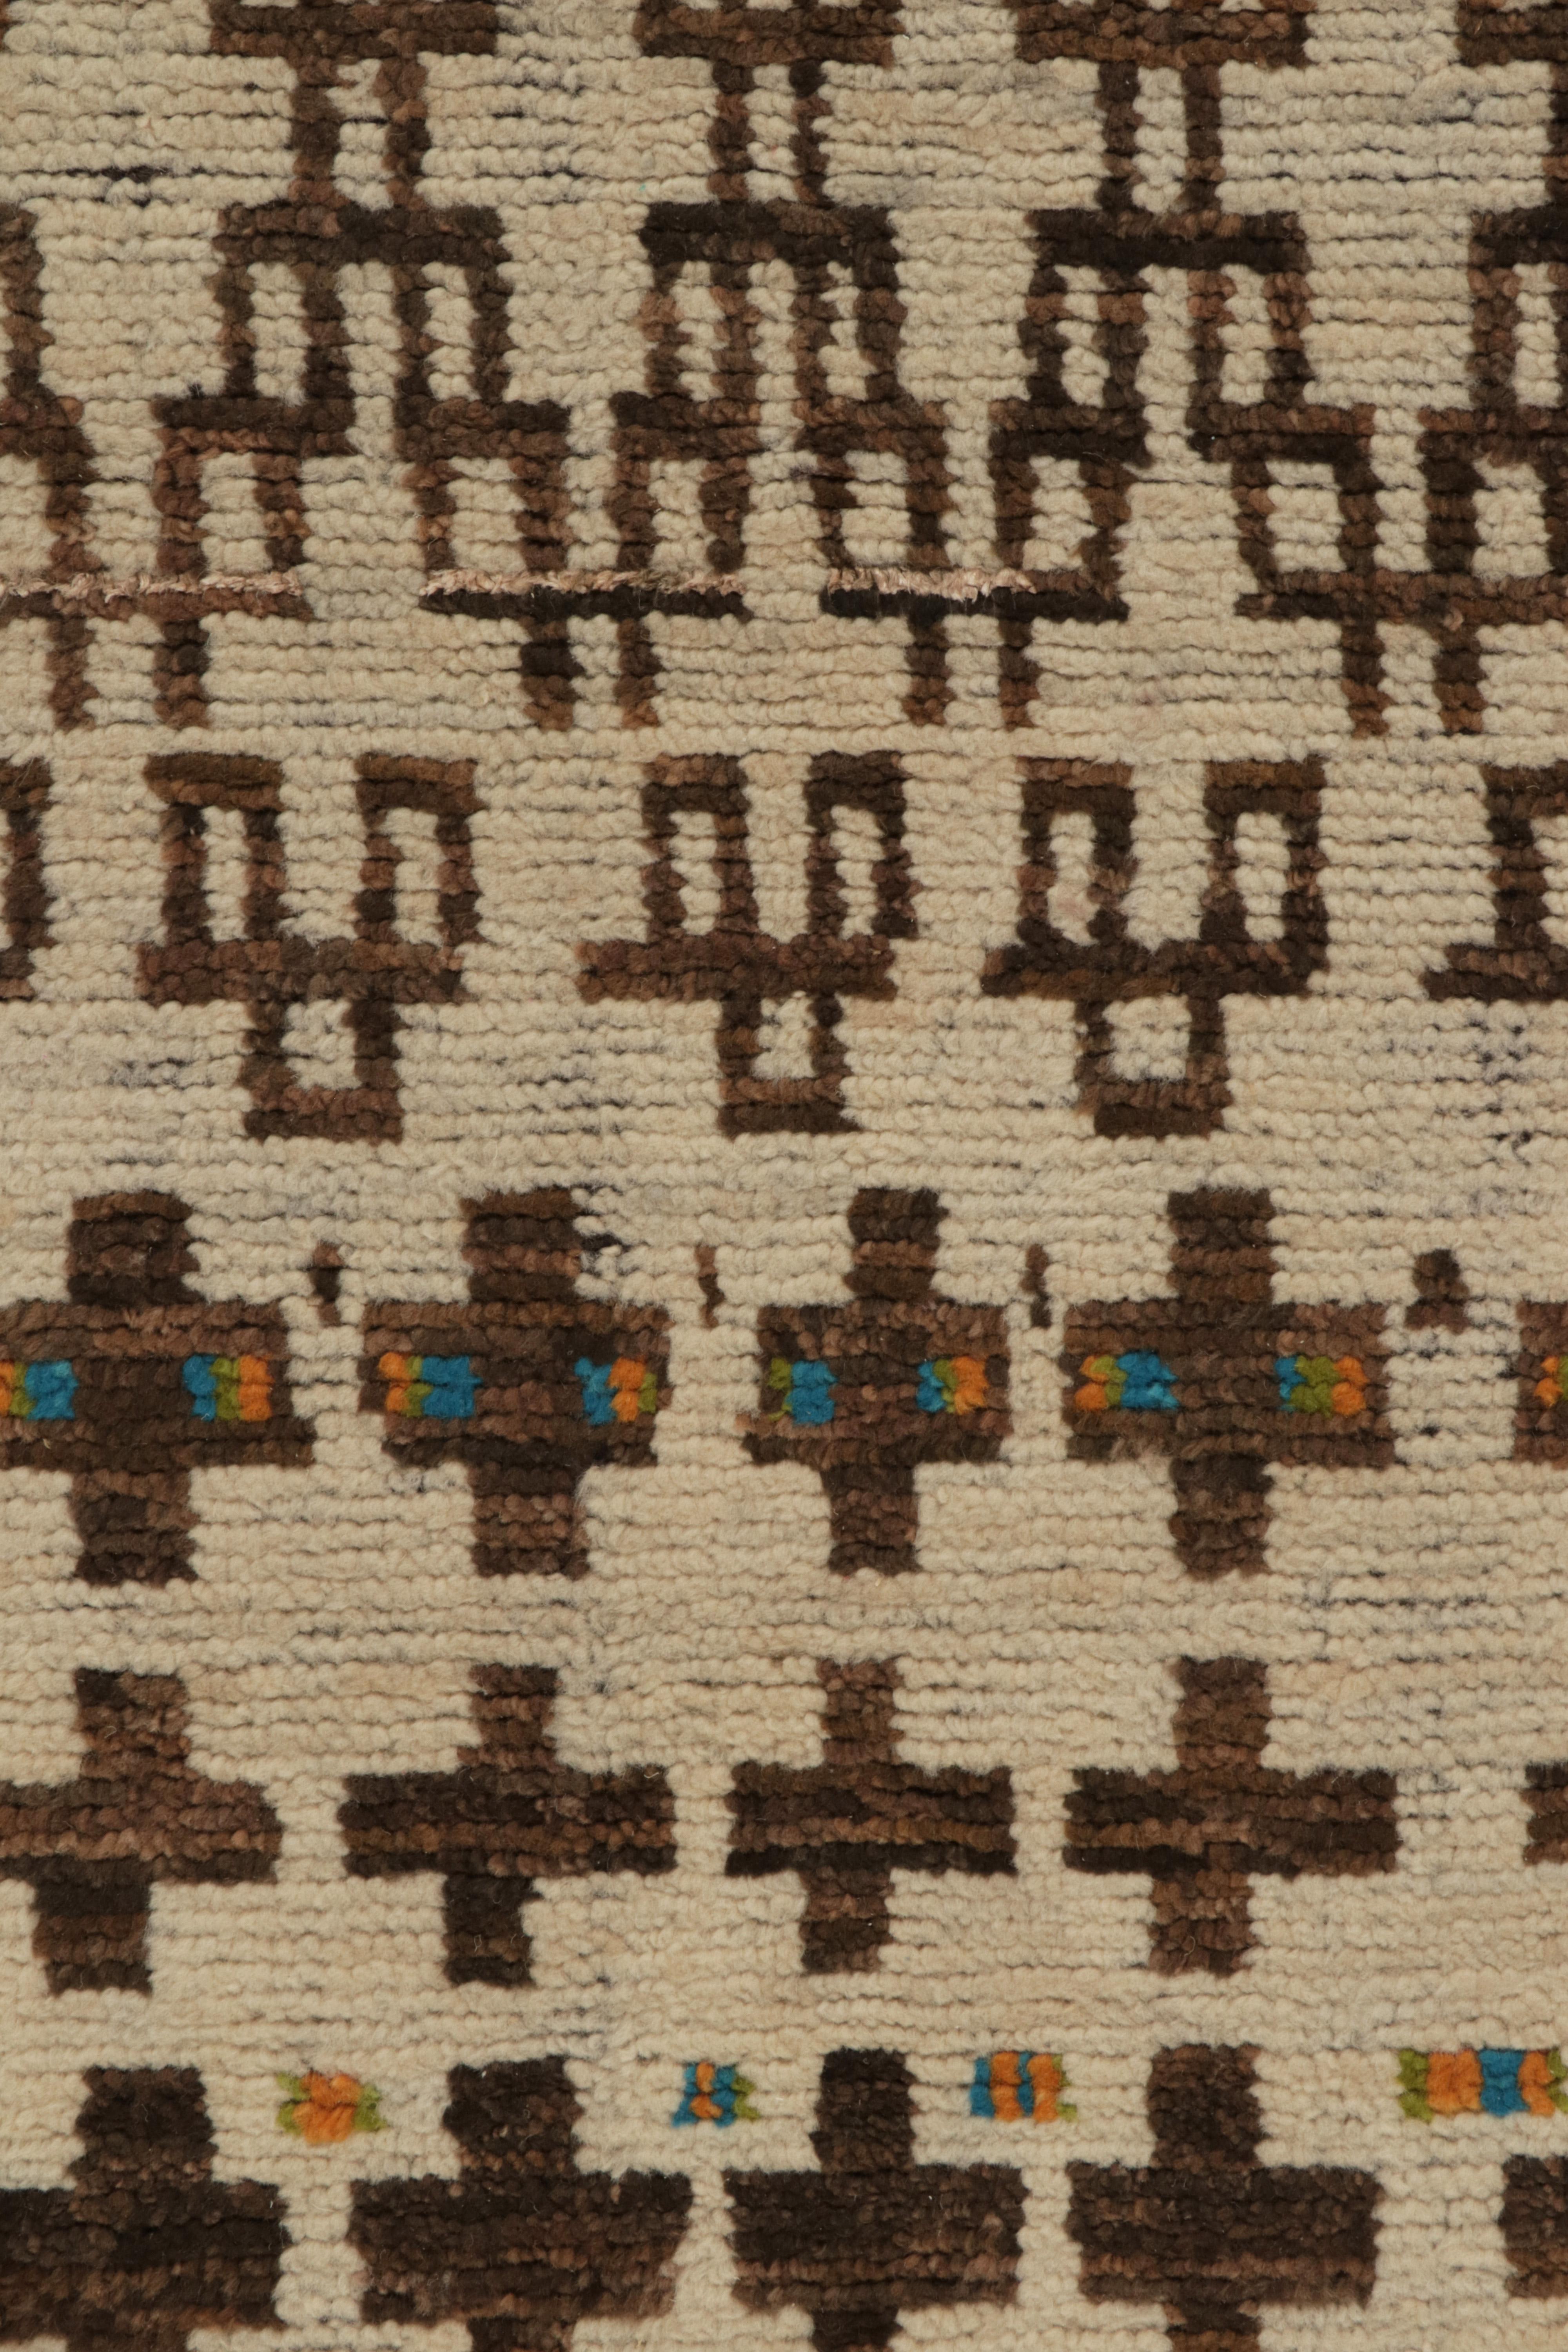 Contemporary Rug & Kilim’s Moroccan Style Runner in Beige-Brown Tribal Geometric Patterns For Sale